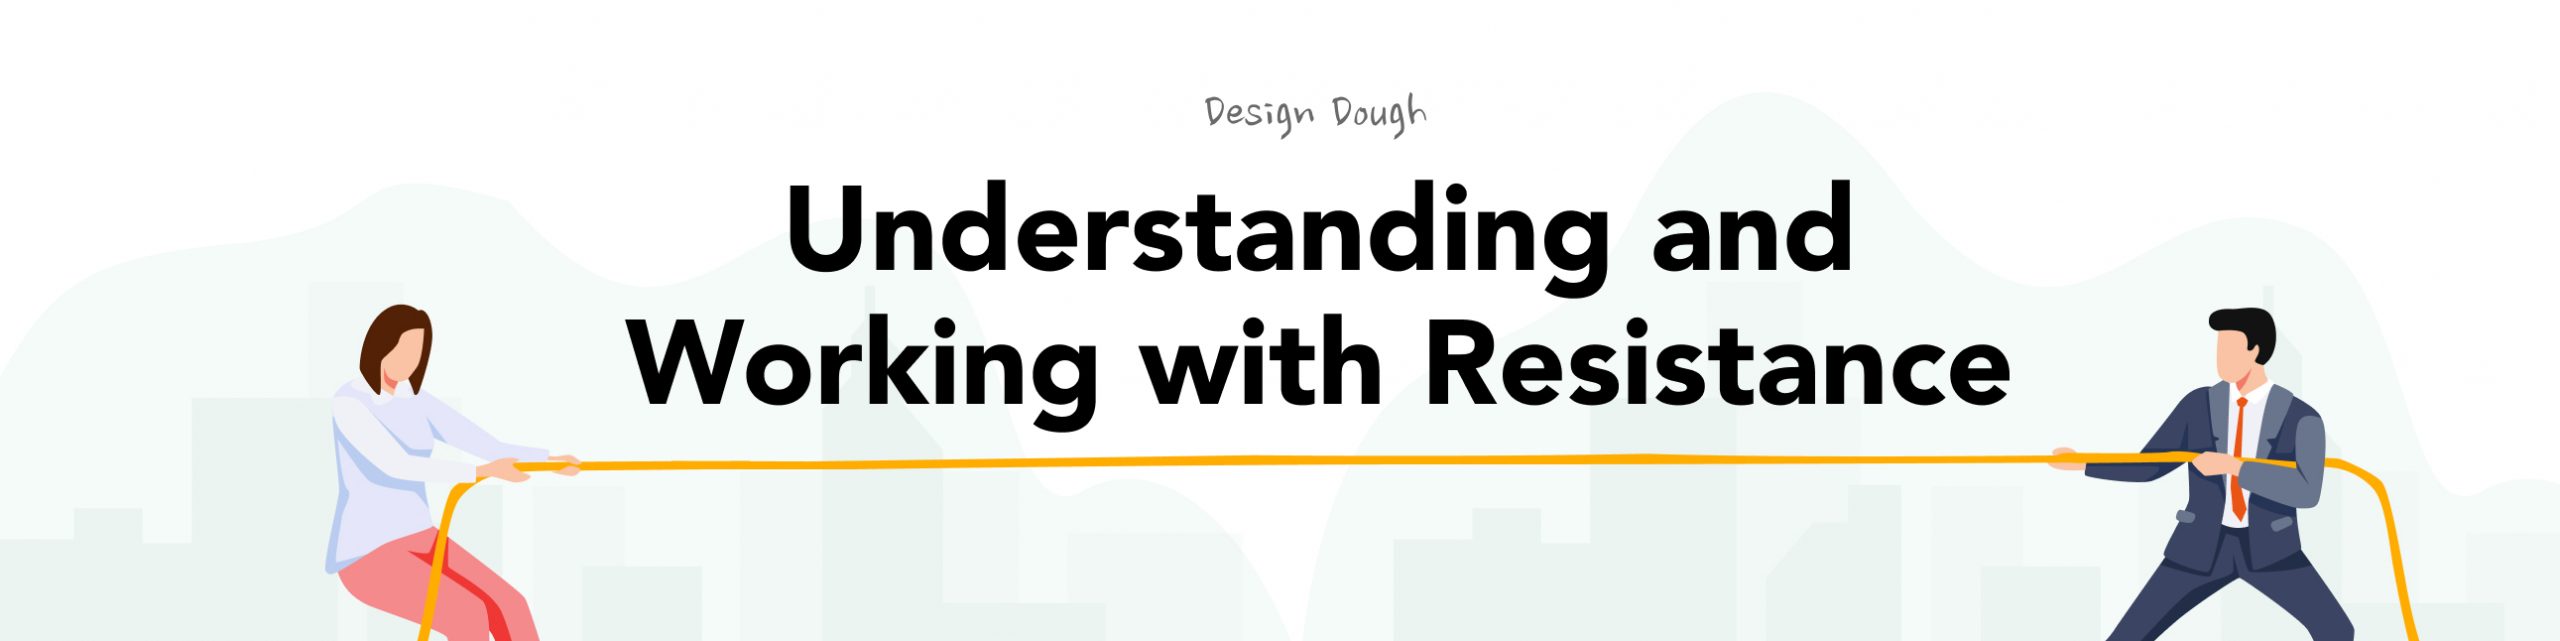 Design Dough: Understanding and Working with Resistance